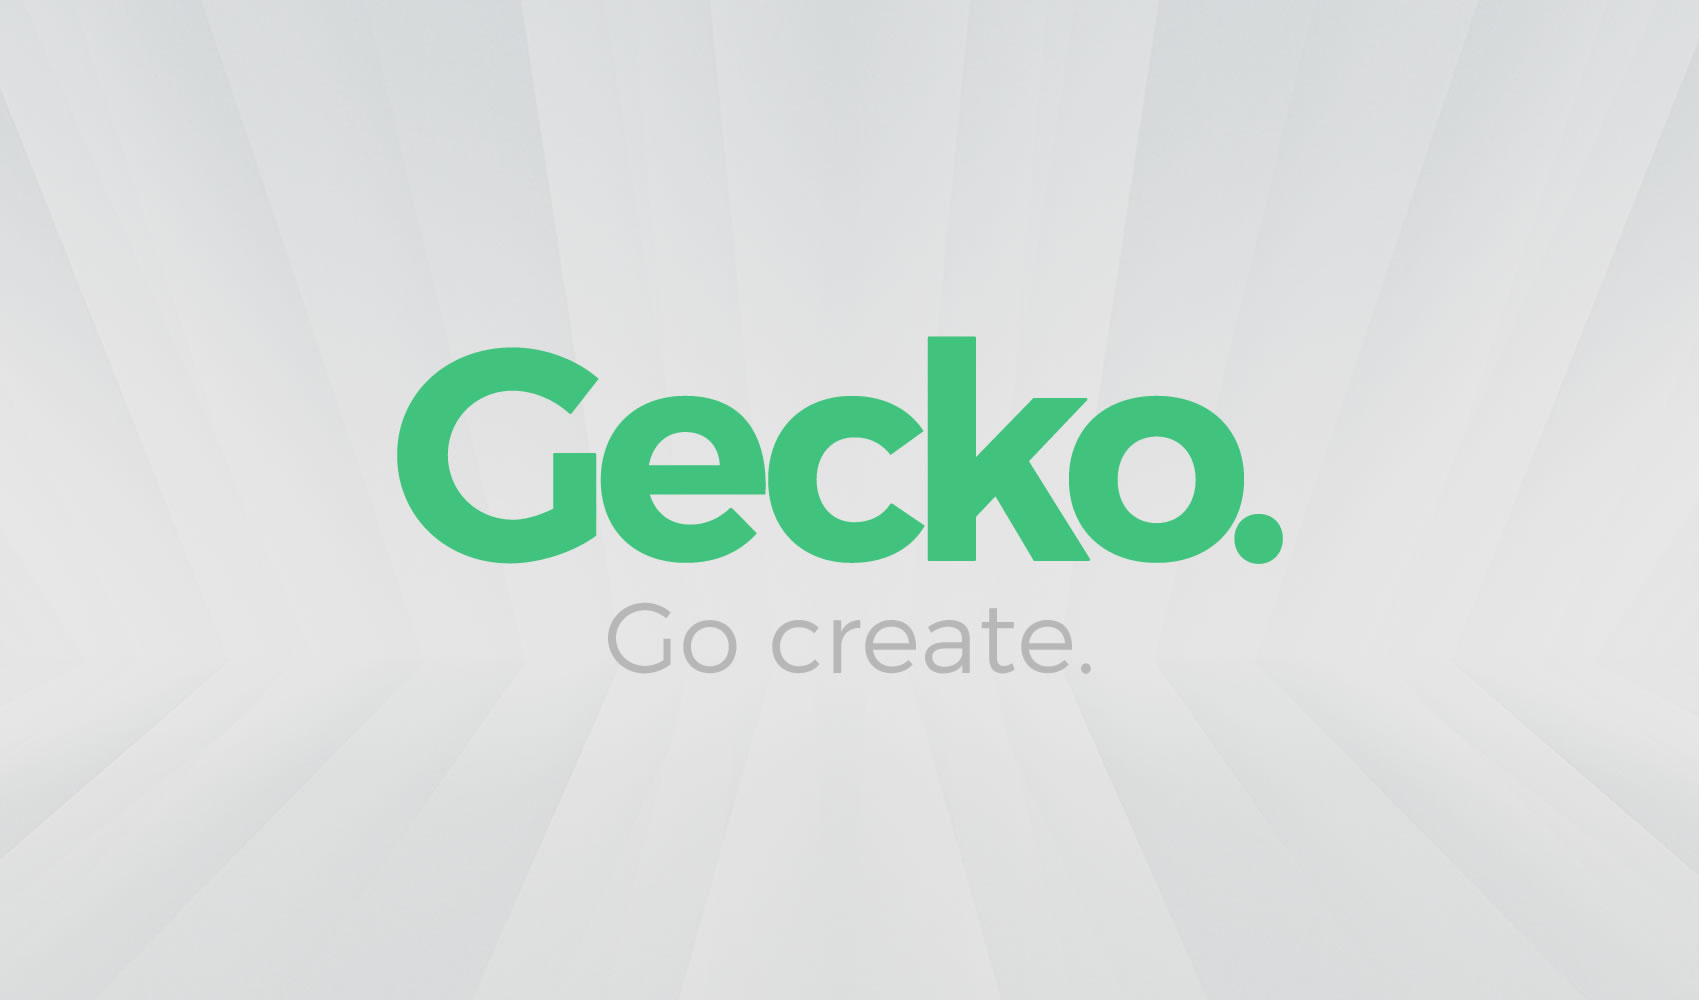 GeckoHost New Zealand - Crafted by Dylan Garrod